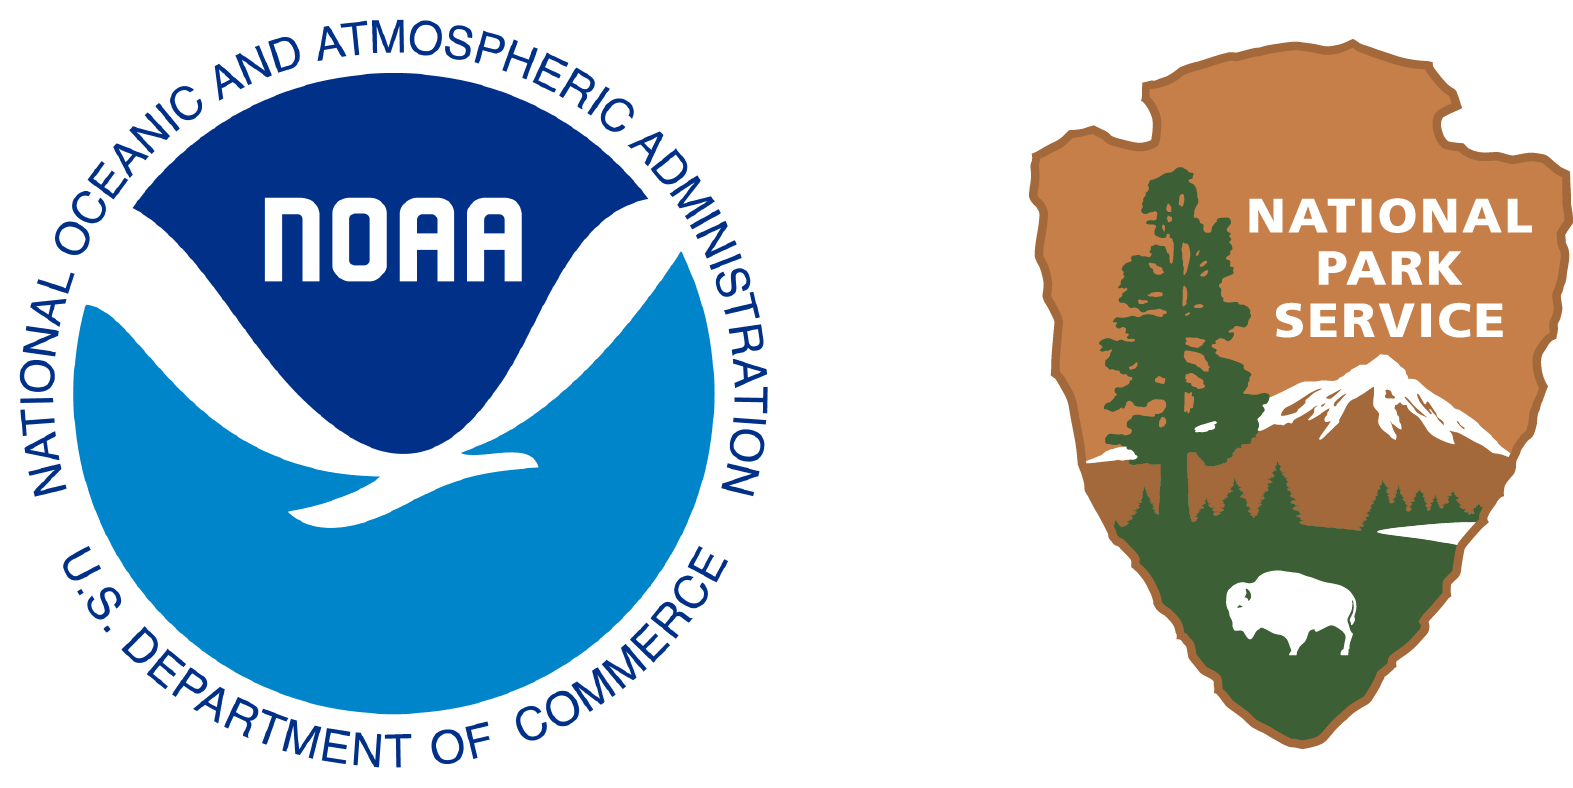 the National Oceanic and Atmospheric Administration's logo and the National Park Service arrowhead logo